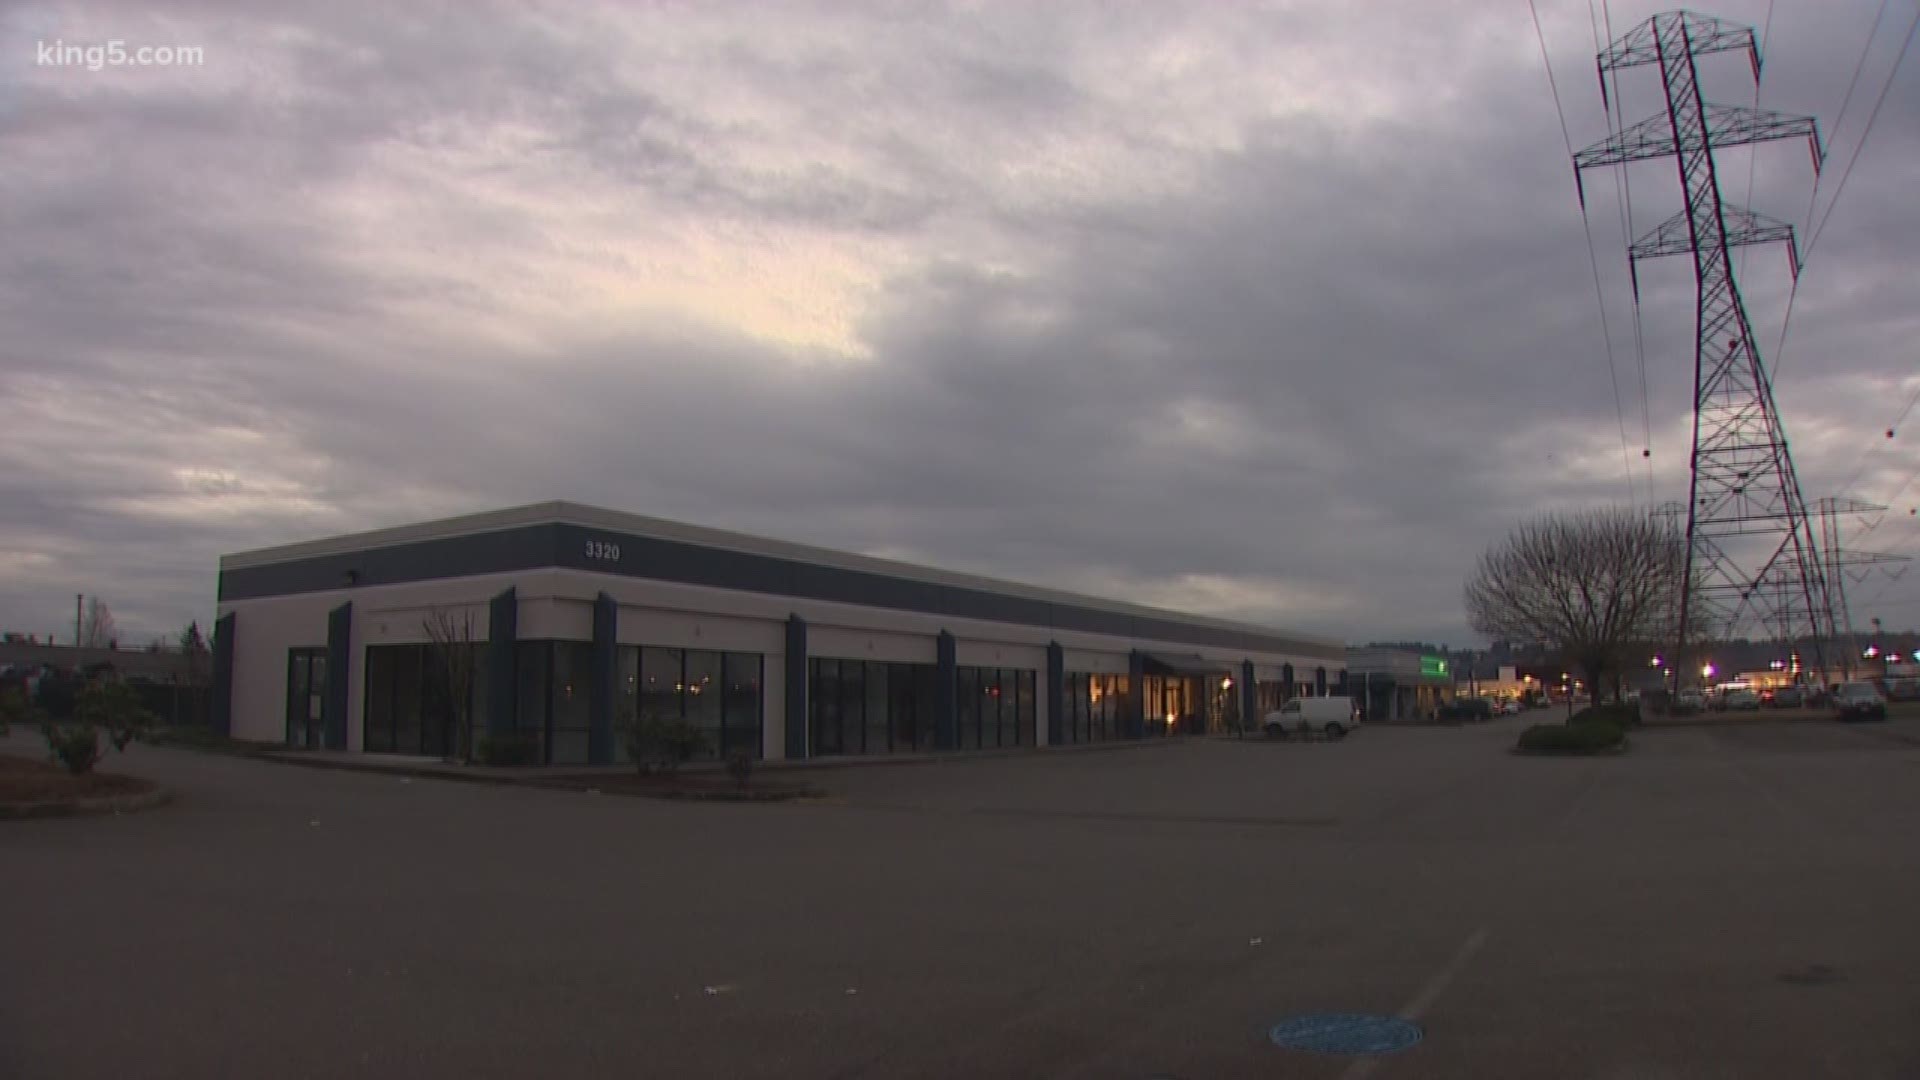 A new opioid treatment facility is coming to Auburn. KING 5's Michael Crowe got reaction from residents.